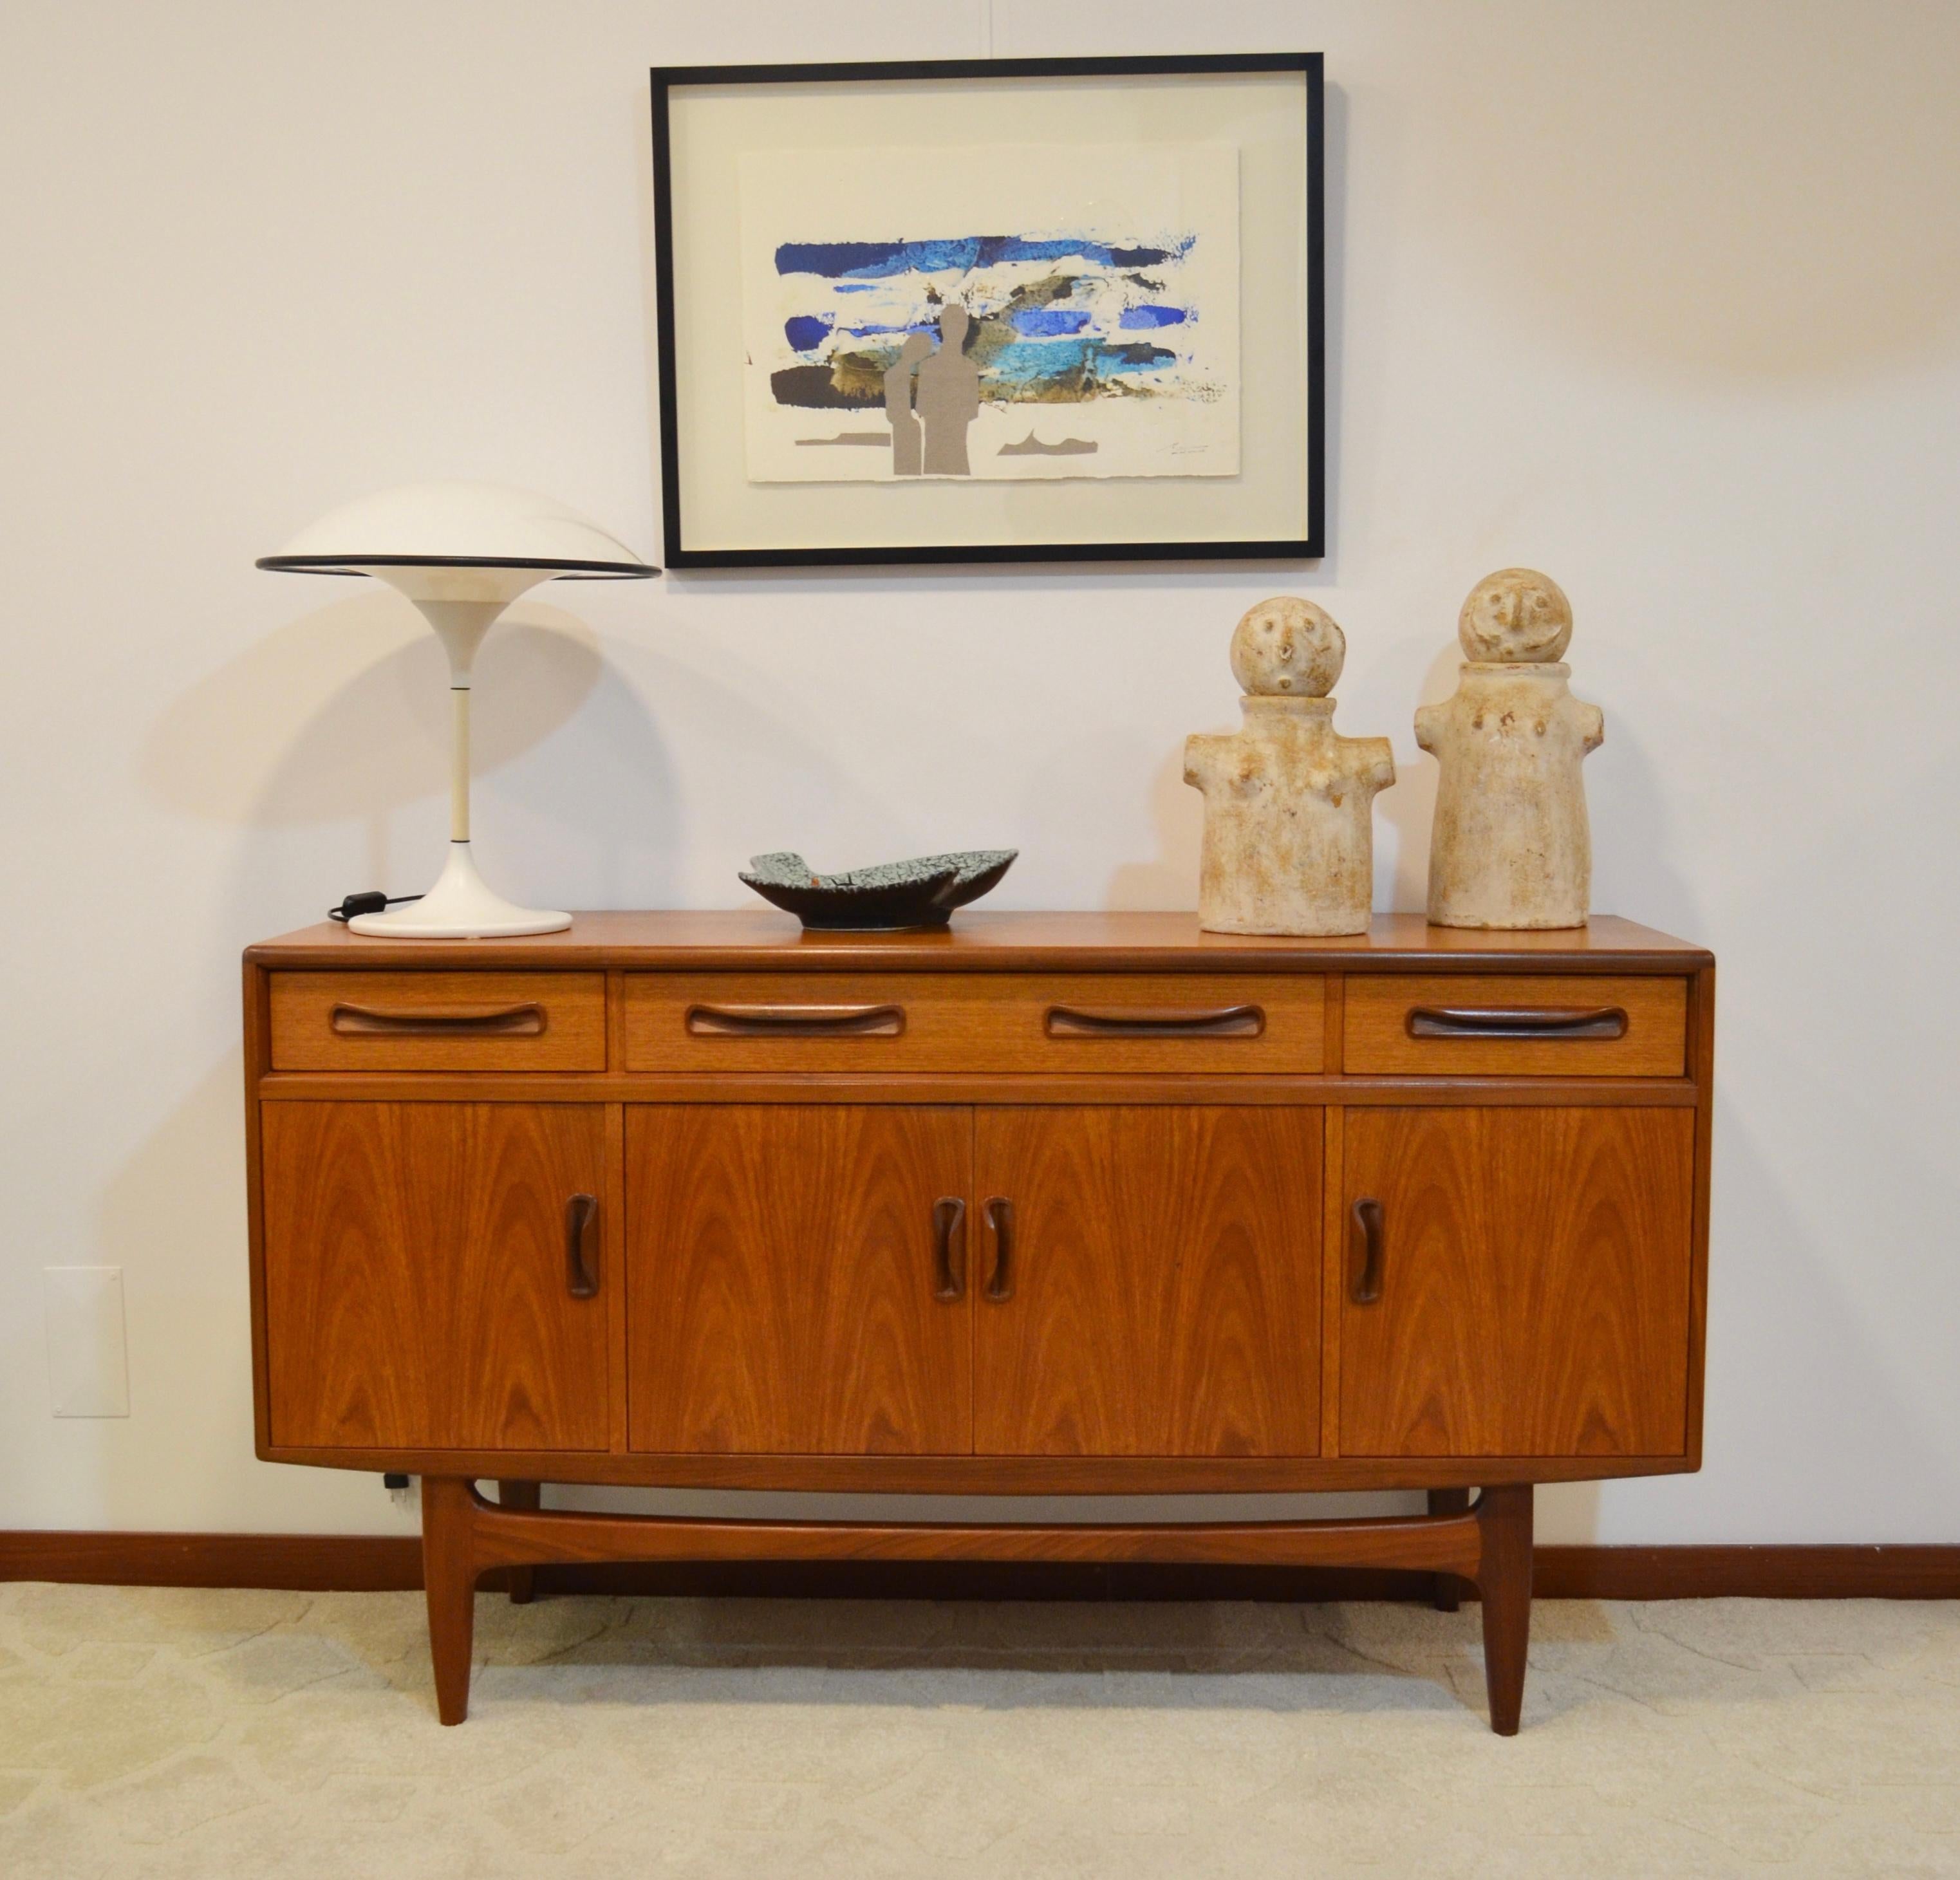 Mid-20th Century Midcentury Teak Sideboard by v. Wilkins for G-Plan, 60s For Sale